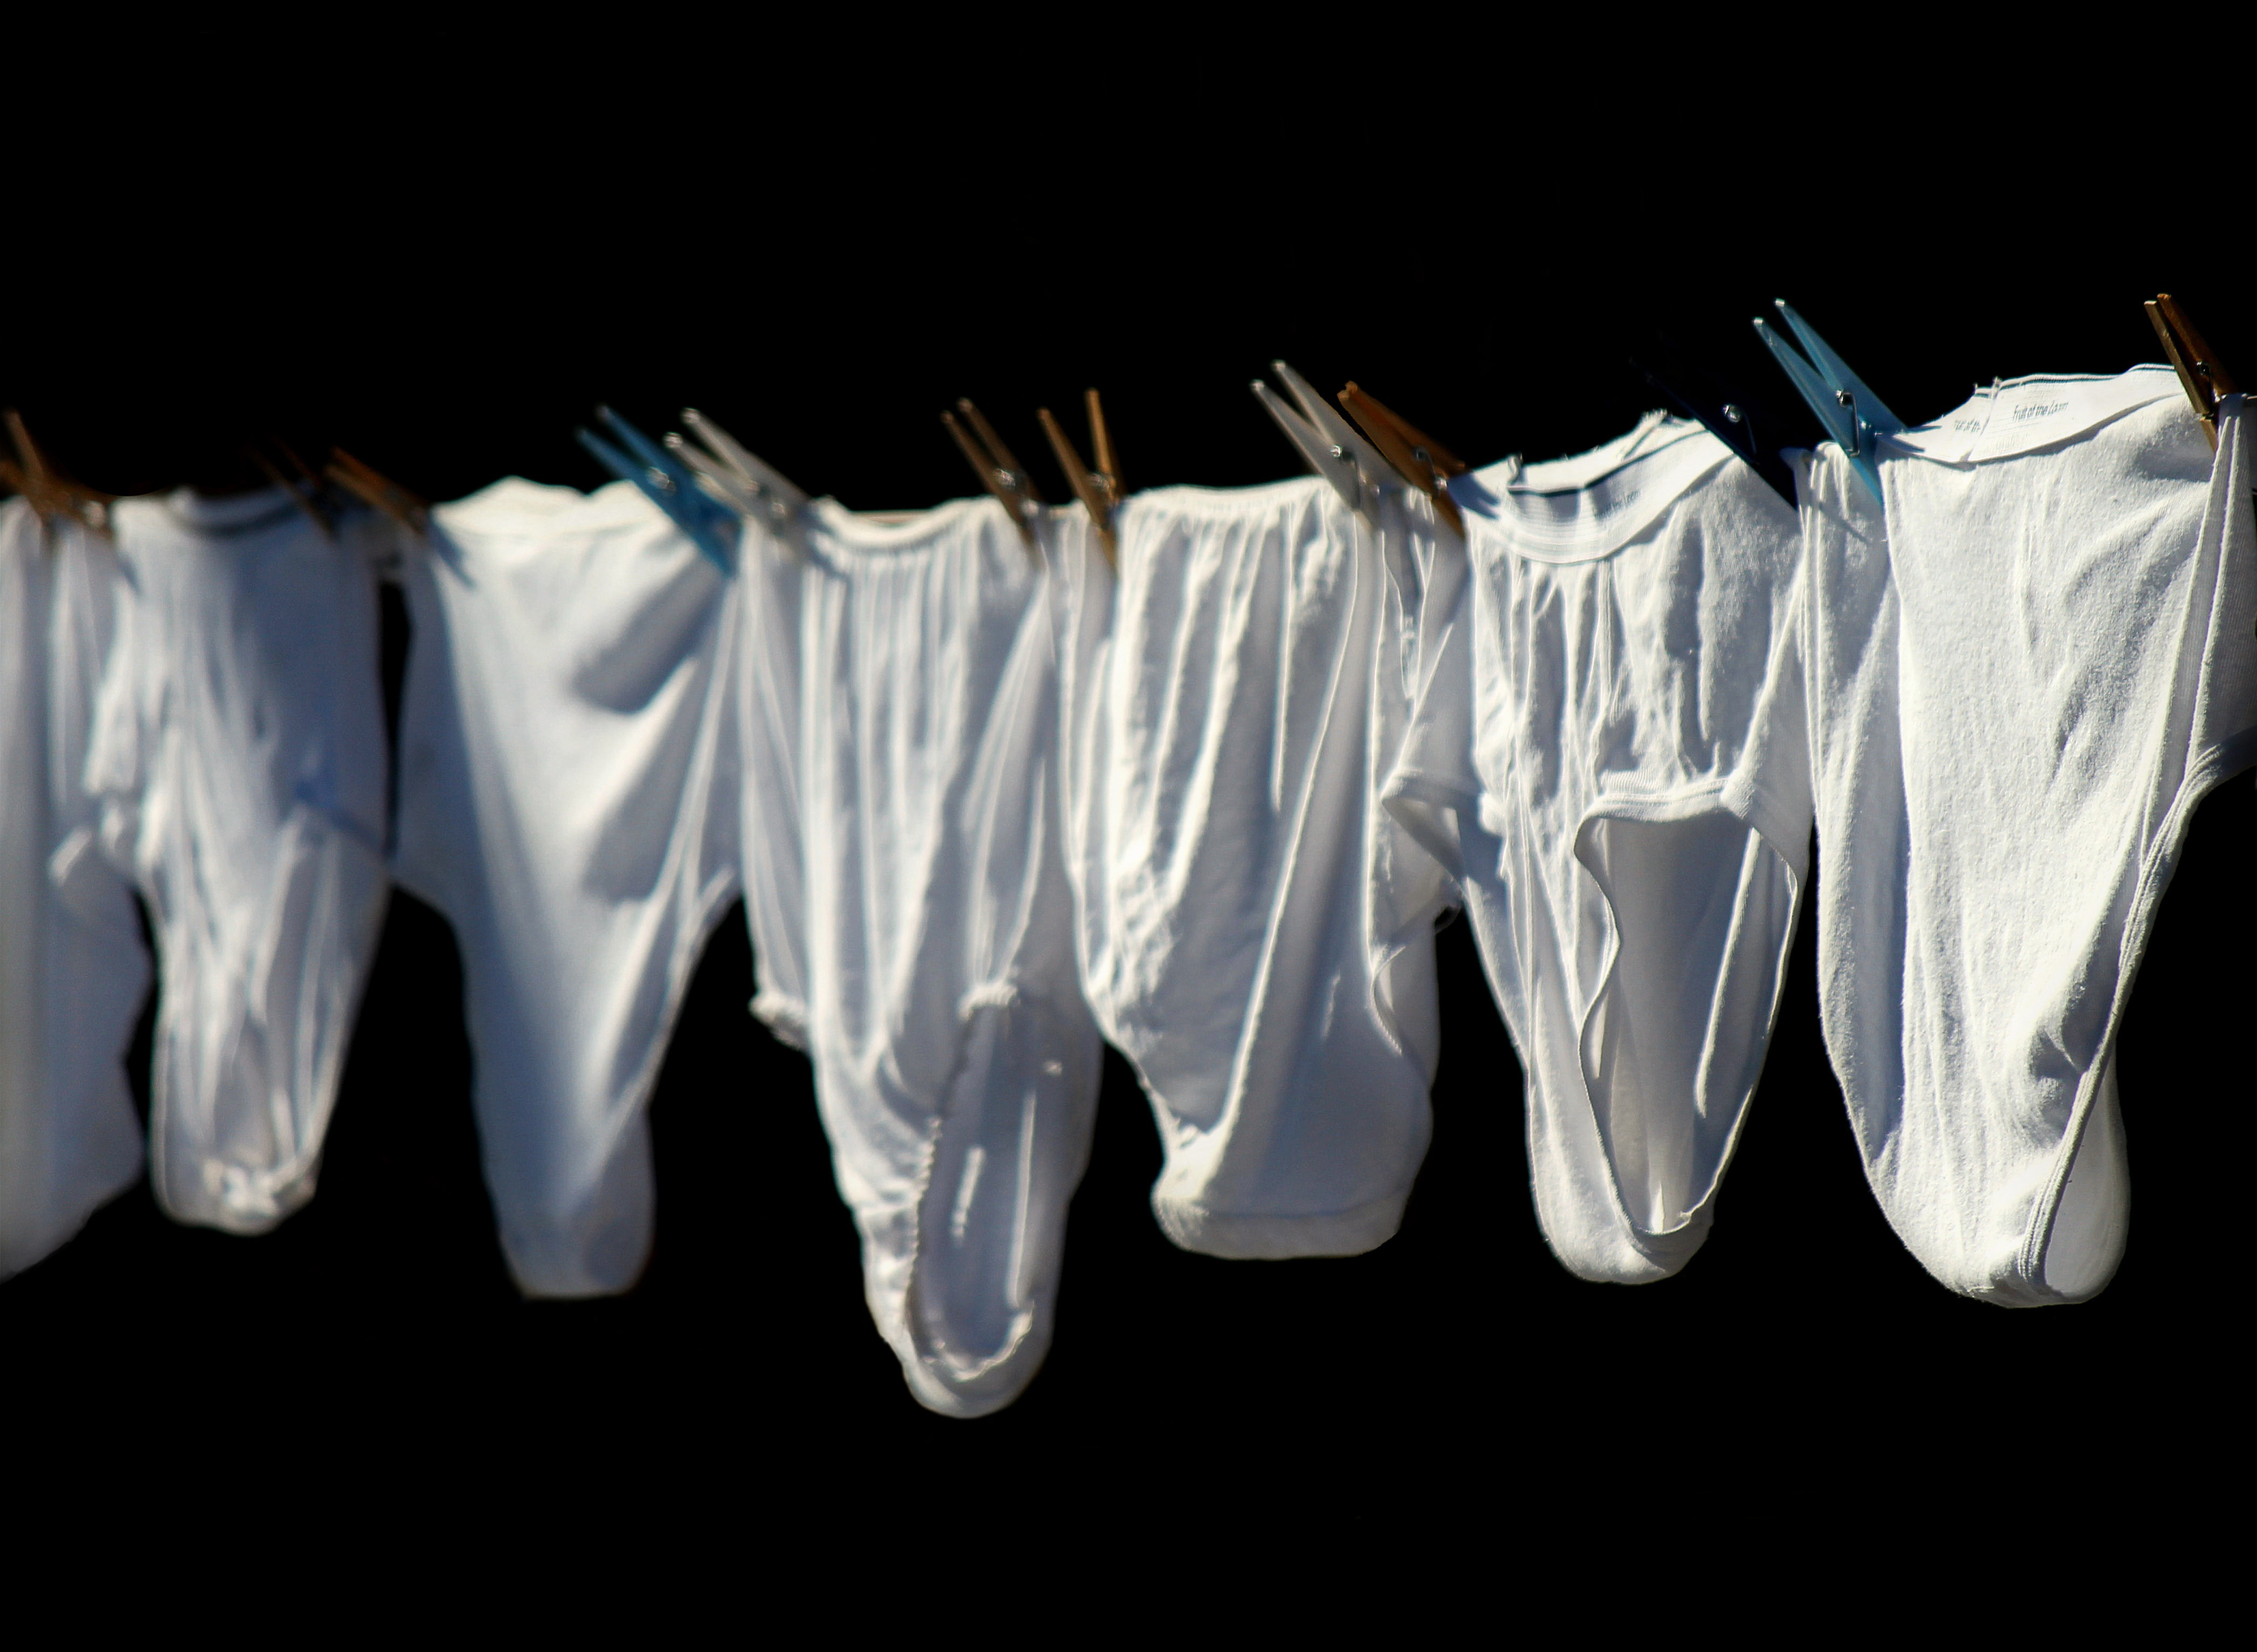 Underwear on a Clothesline (Getty Images)